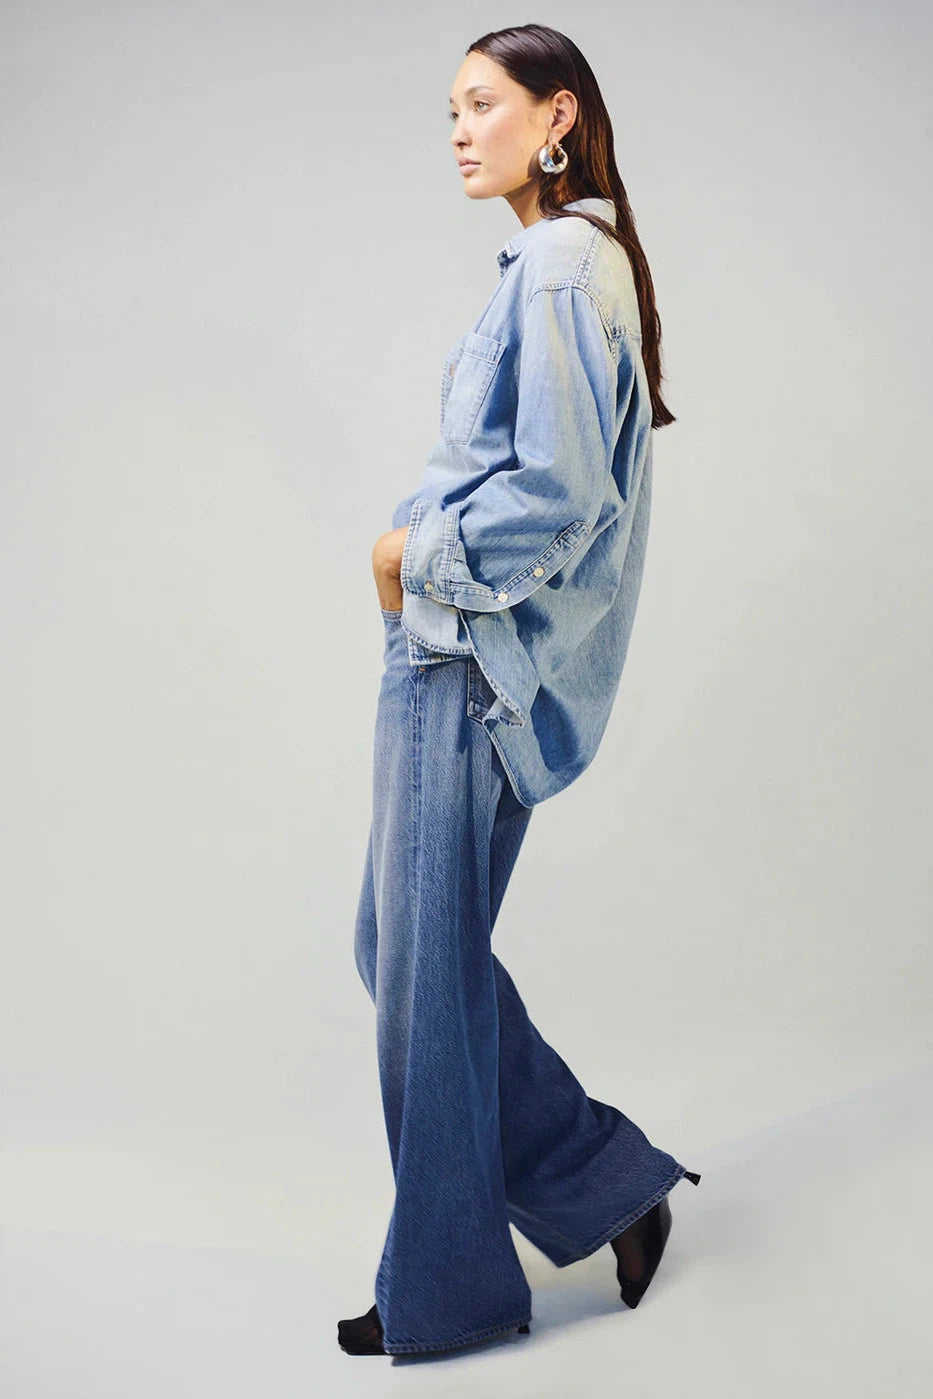 CITIZENS OF HUMANITY PALOMA BAGGY JEANS IN SIESTA